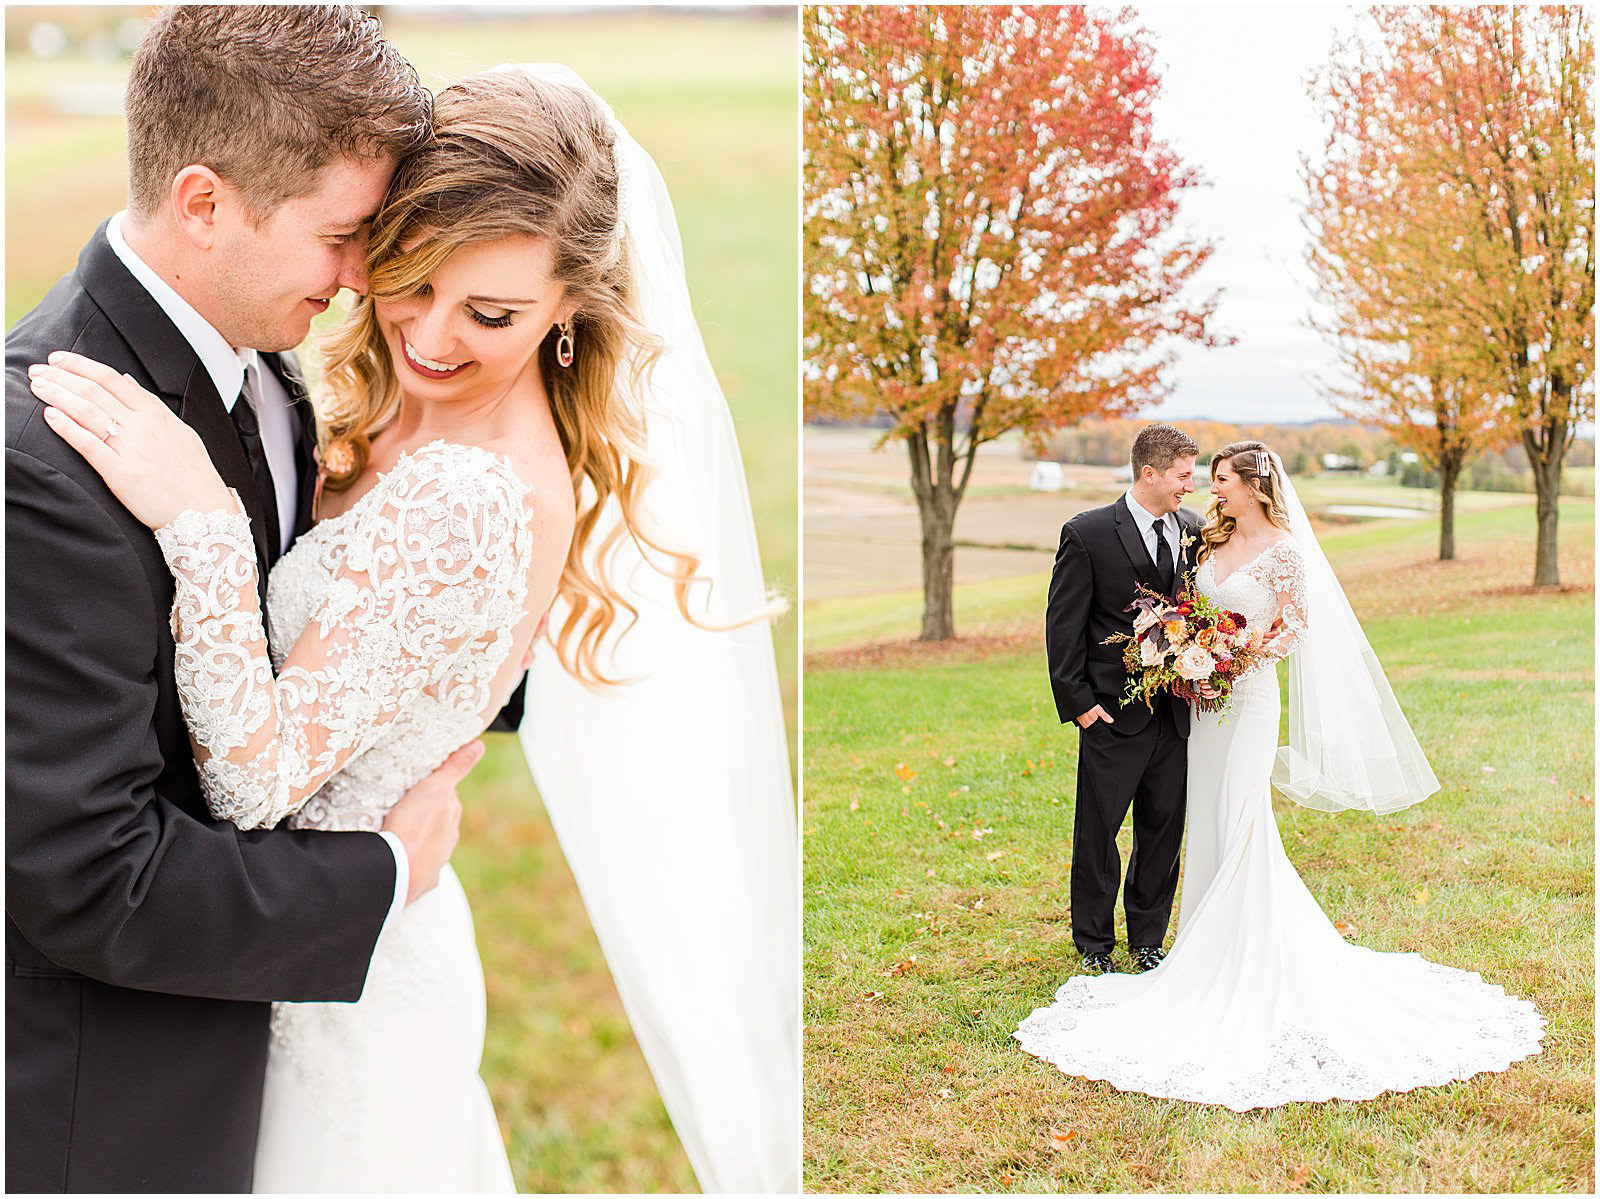 A Romantic Fall Wedding in Ferdinand, IN | Tori and Kyle | Bret and Brandie Photography 0058.jpg